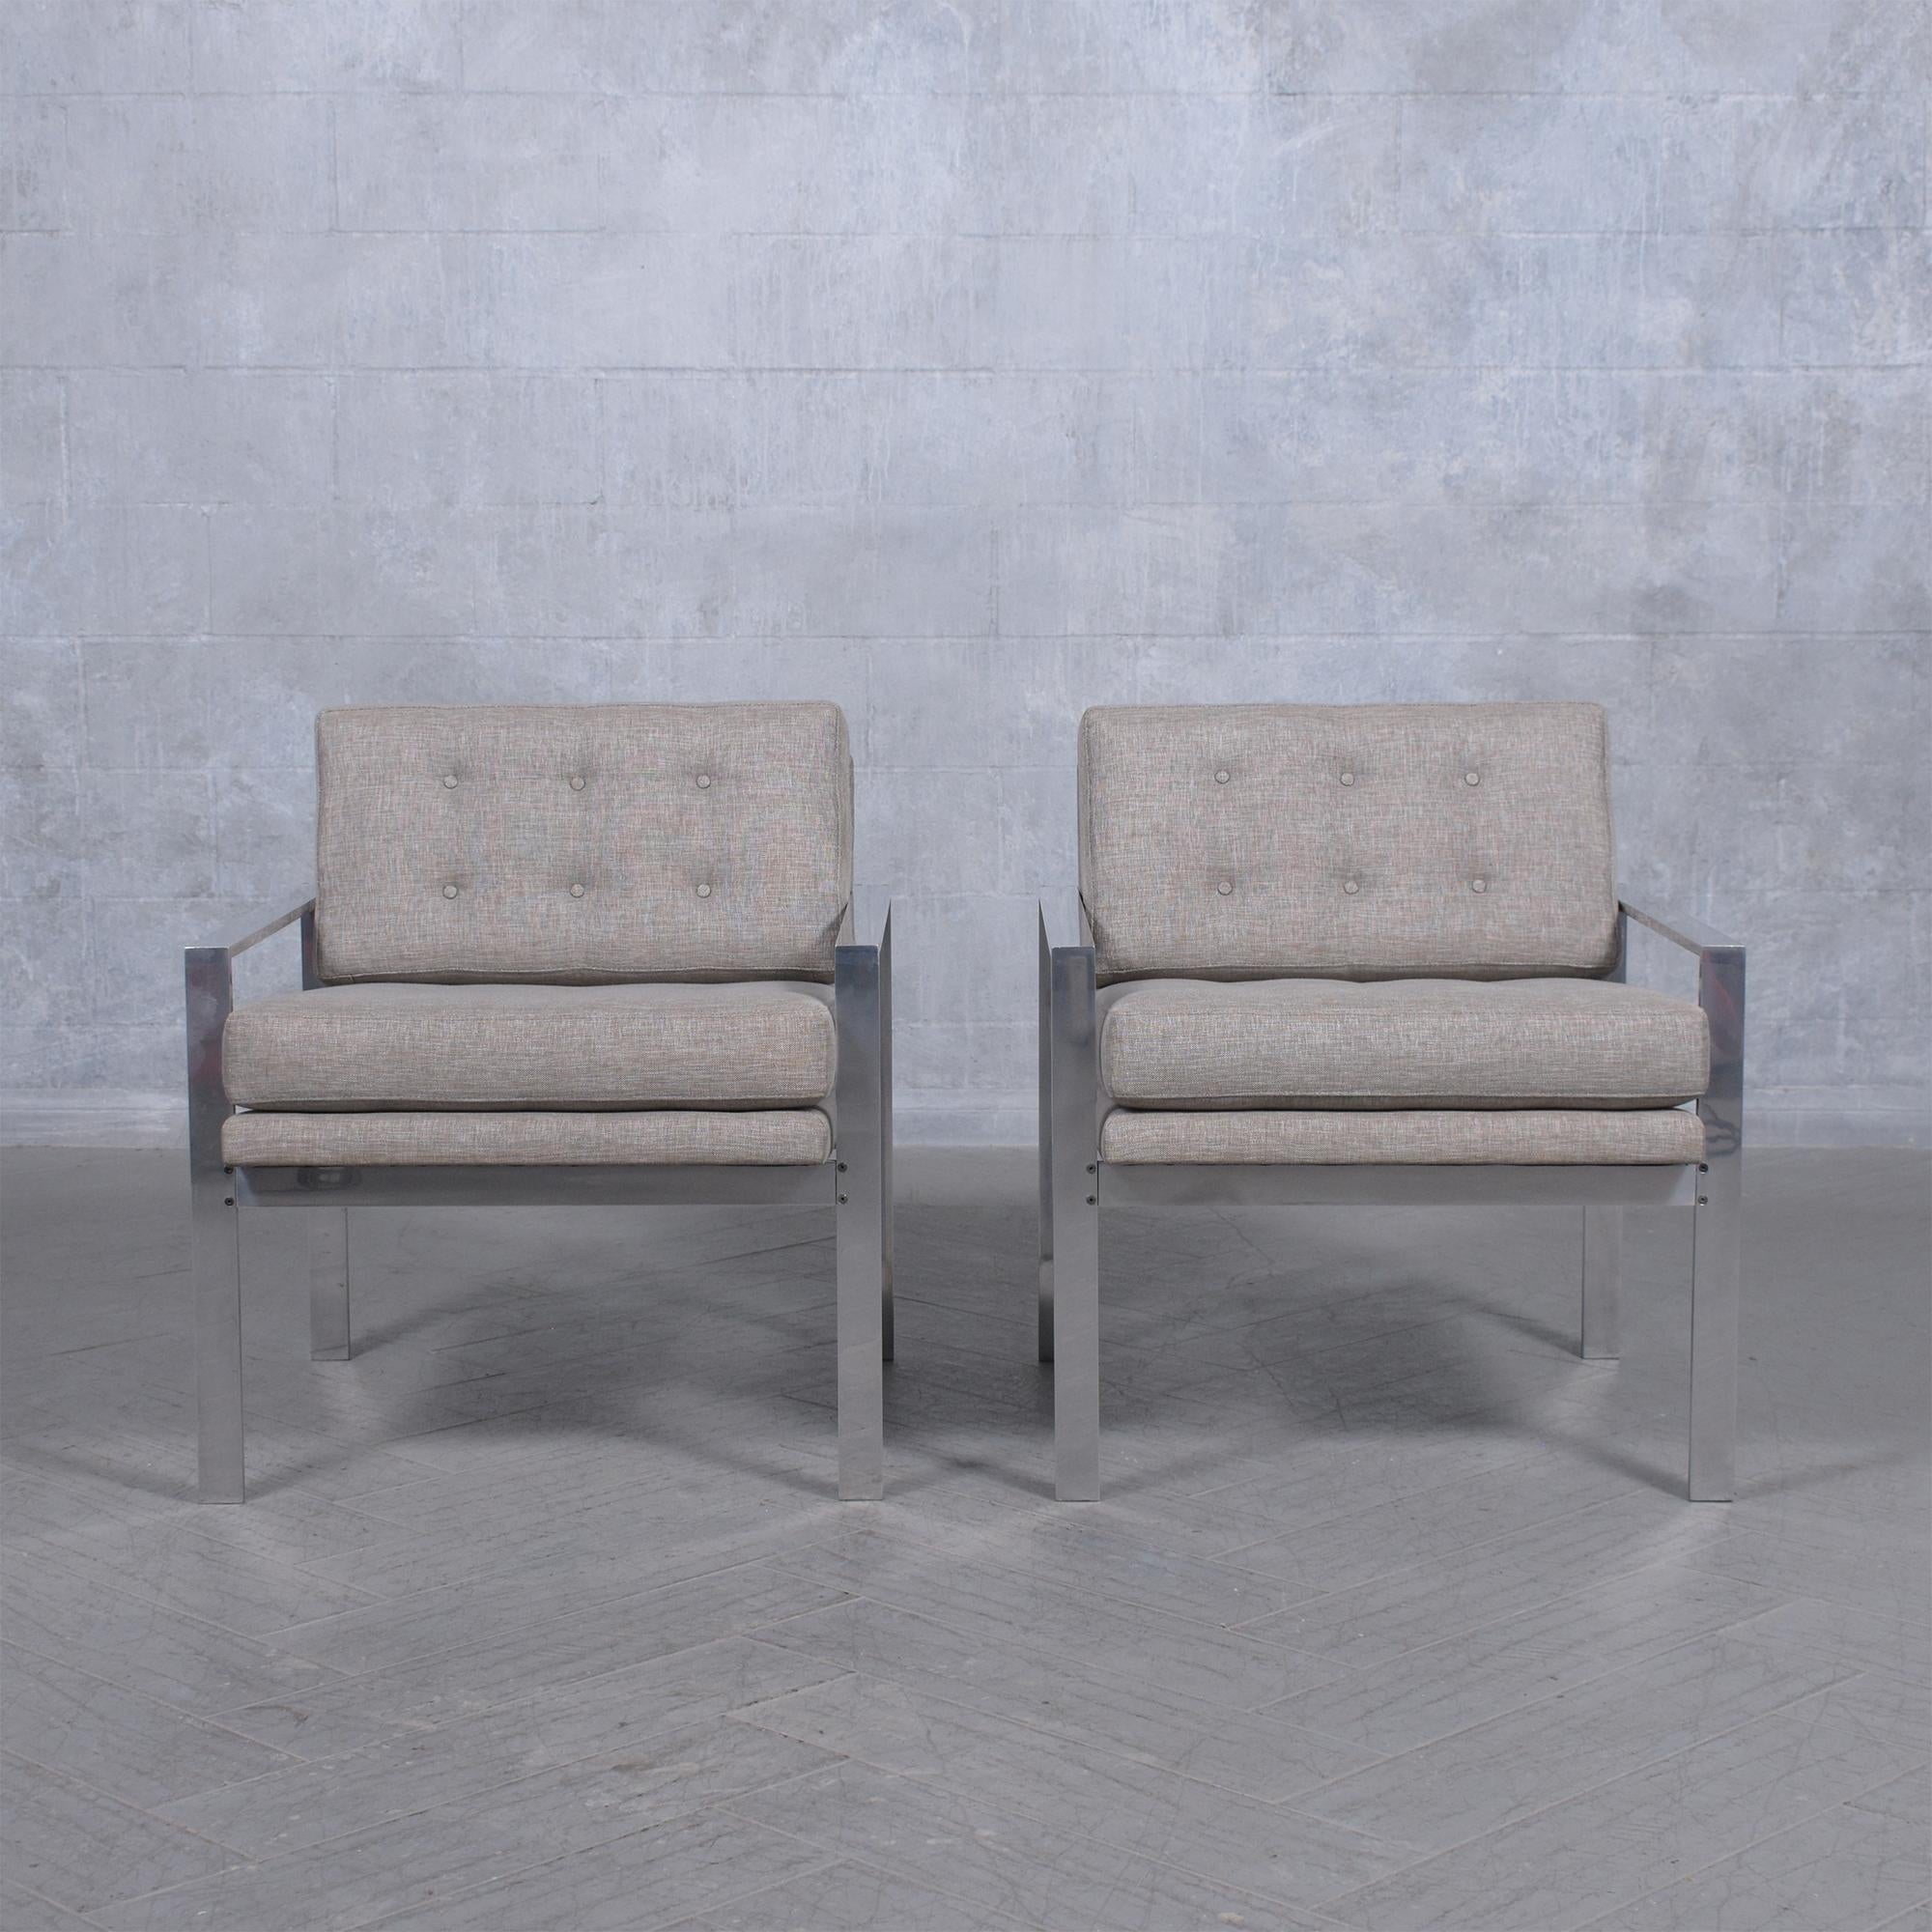 Hand-Crafted Restored Milo Baughman Lounge Chairs with Polished Aluminum Frames For Sale